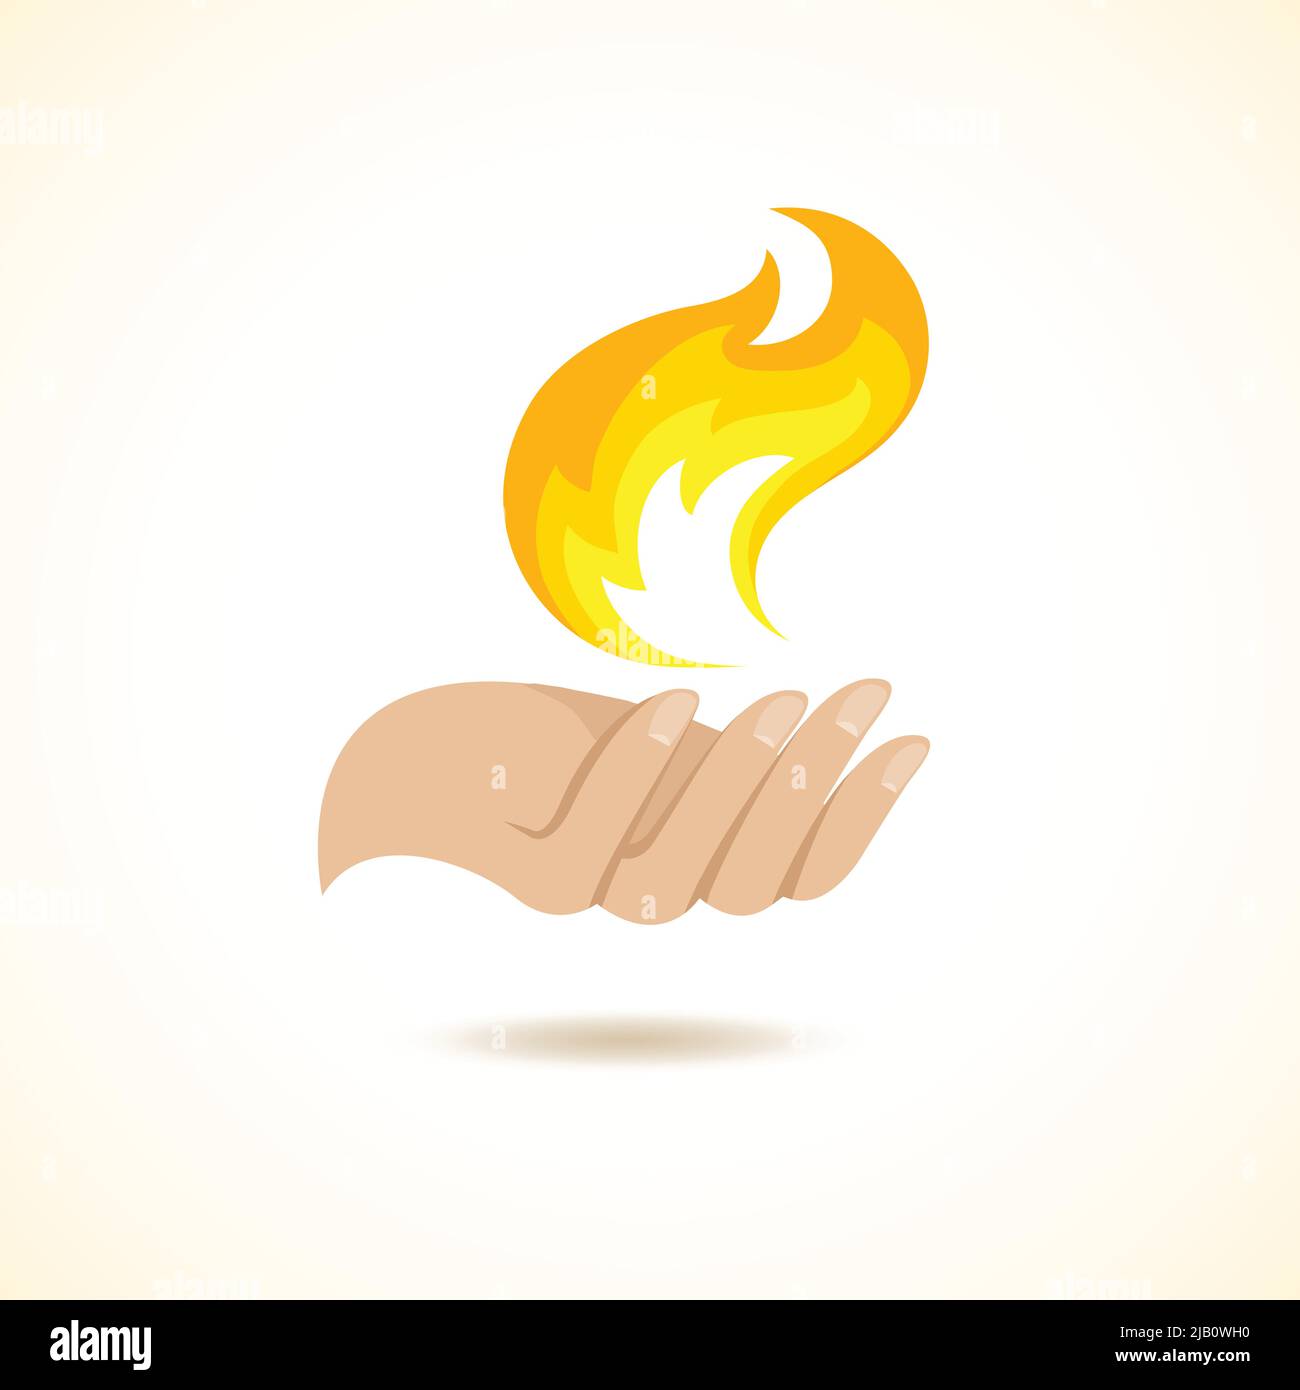 Hands hold fire flame mystery danger creation concept poster vector illustration Stock Vector